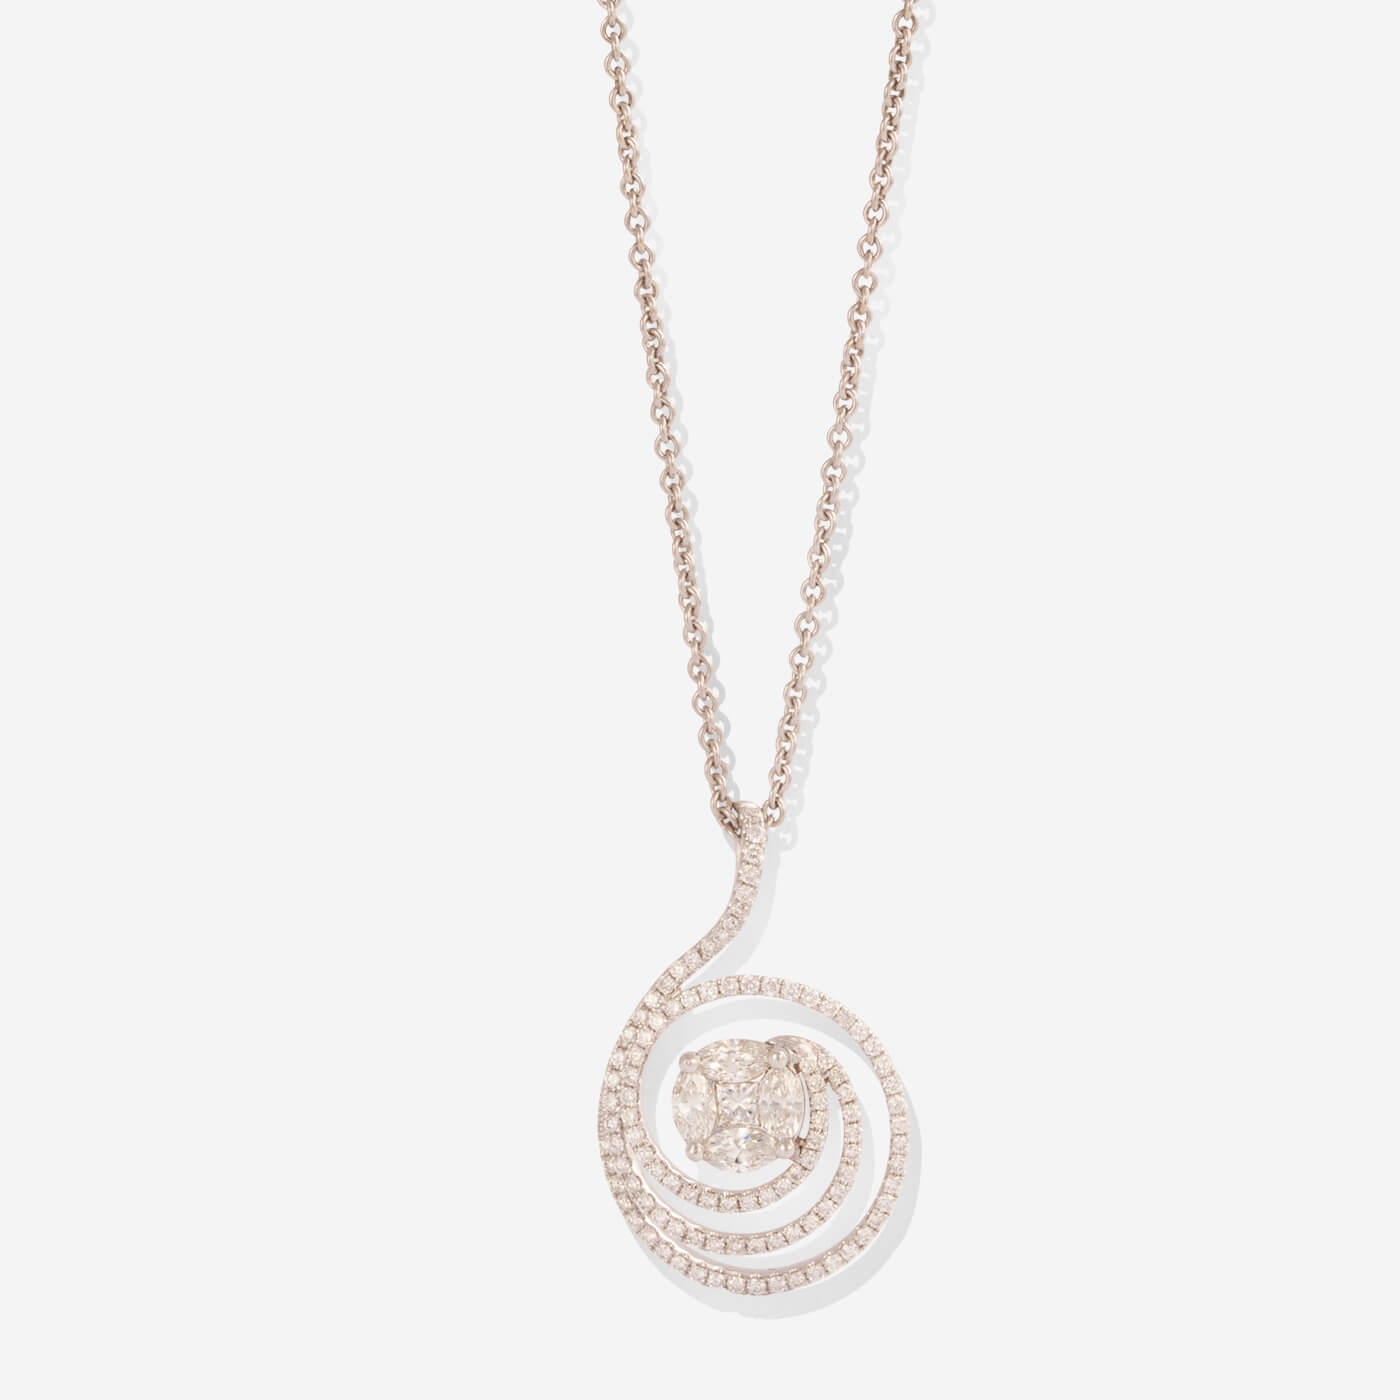 White Gold Swirl With Diamonds Necklace - Ref: KG00072